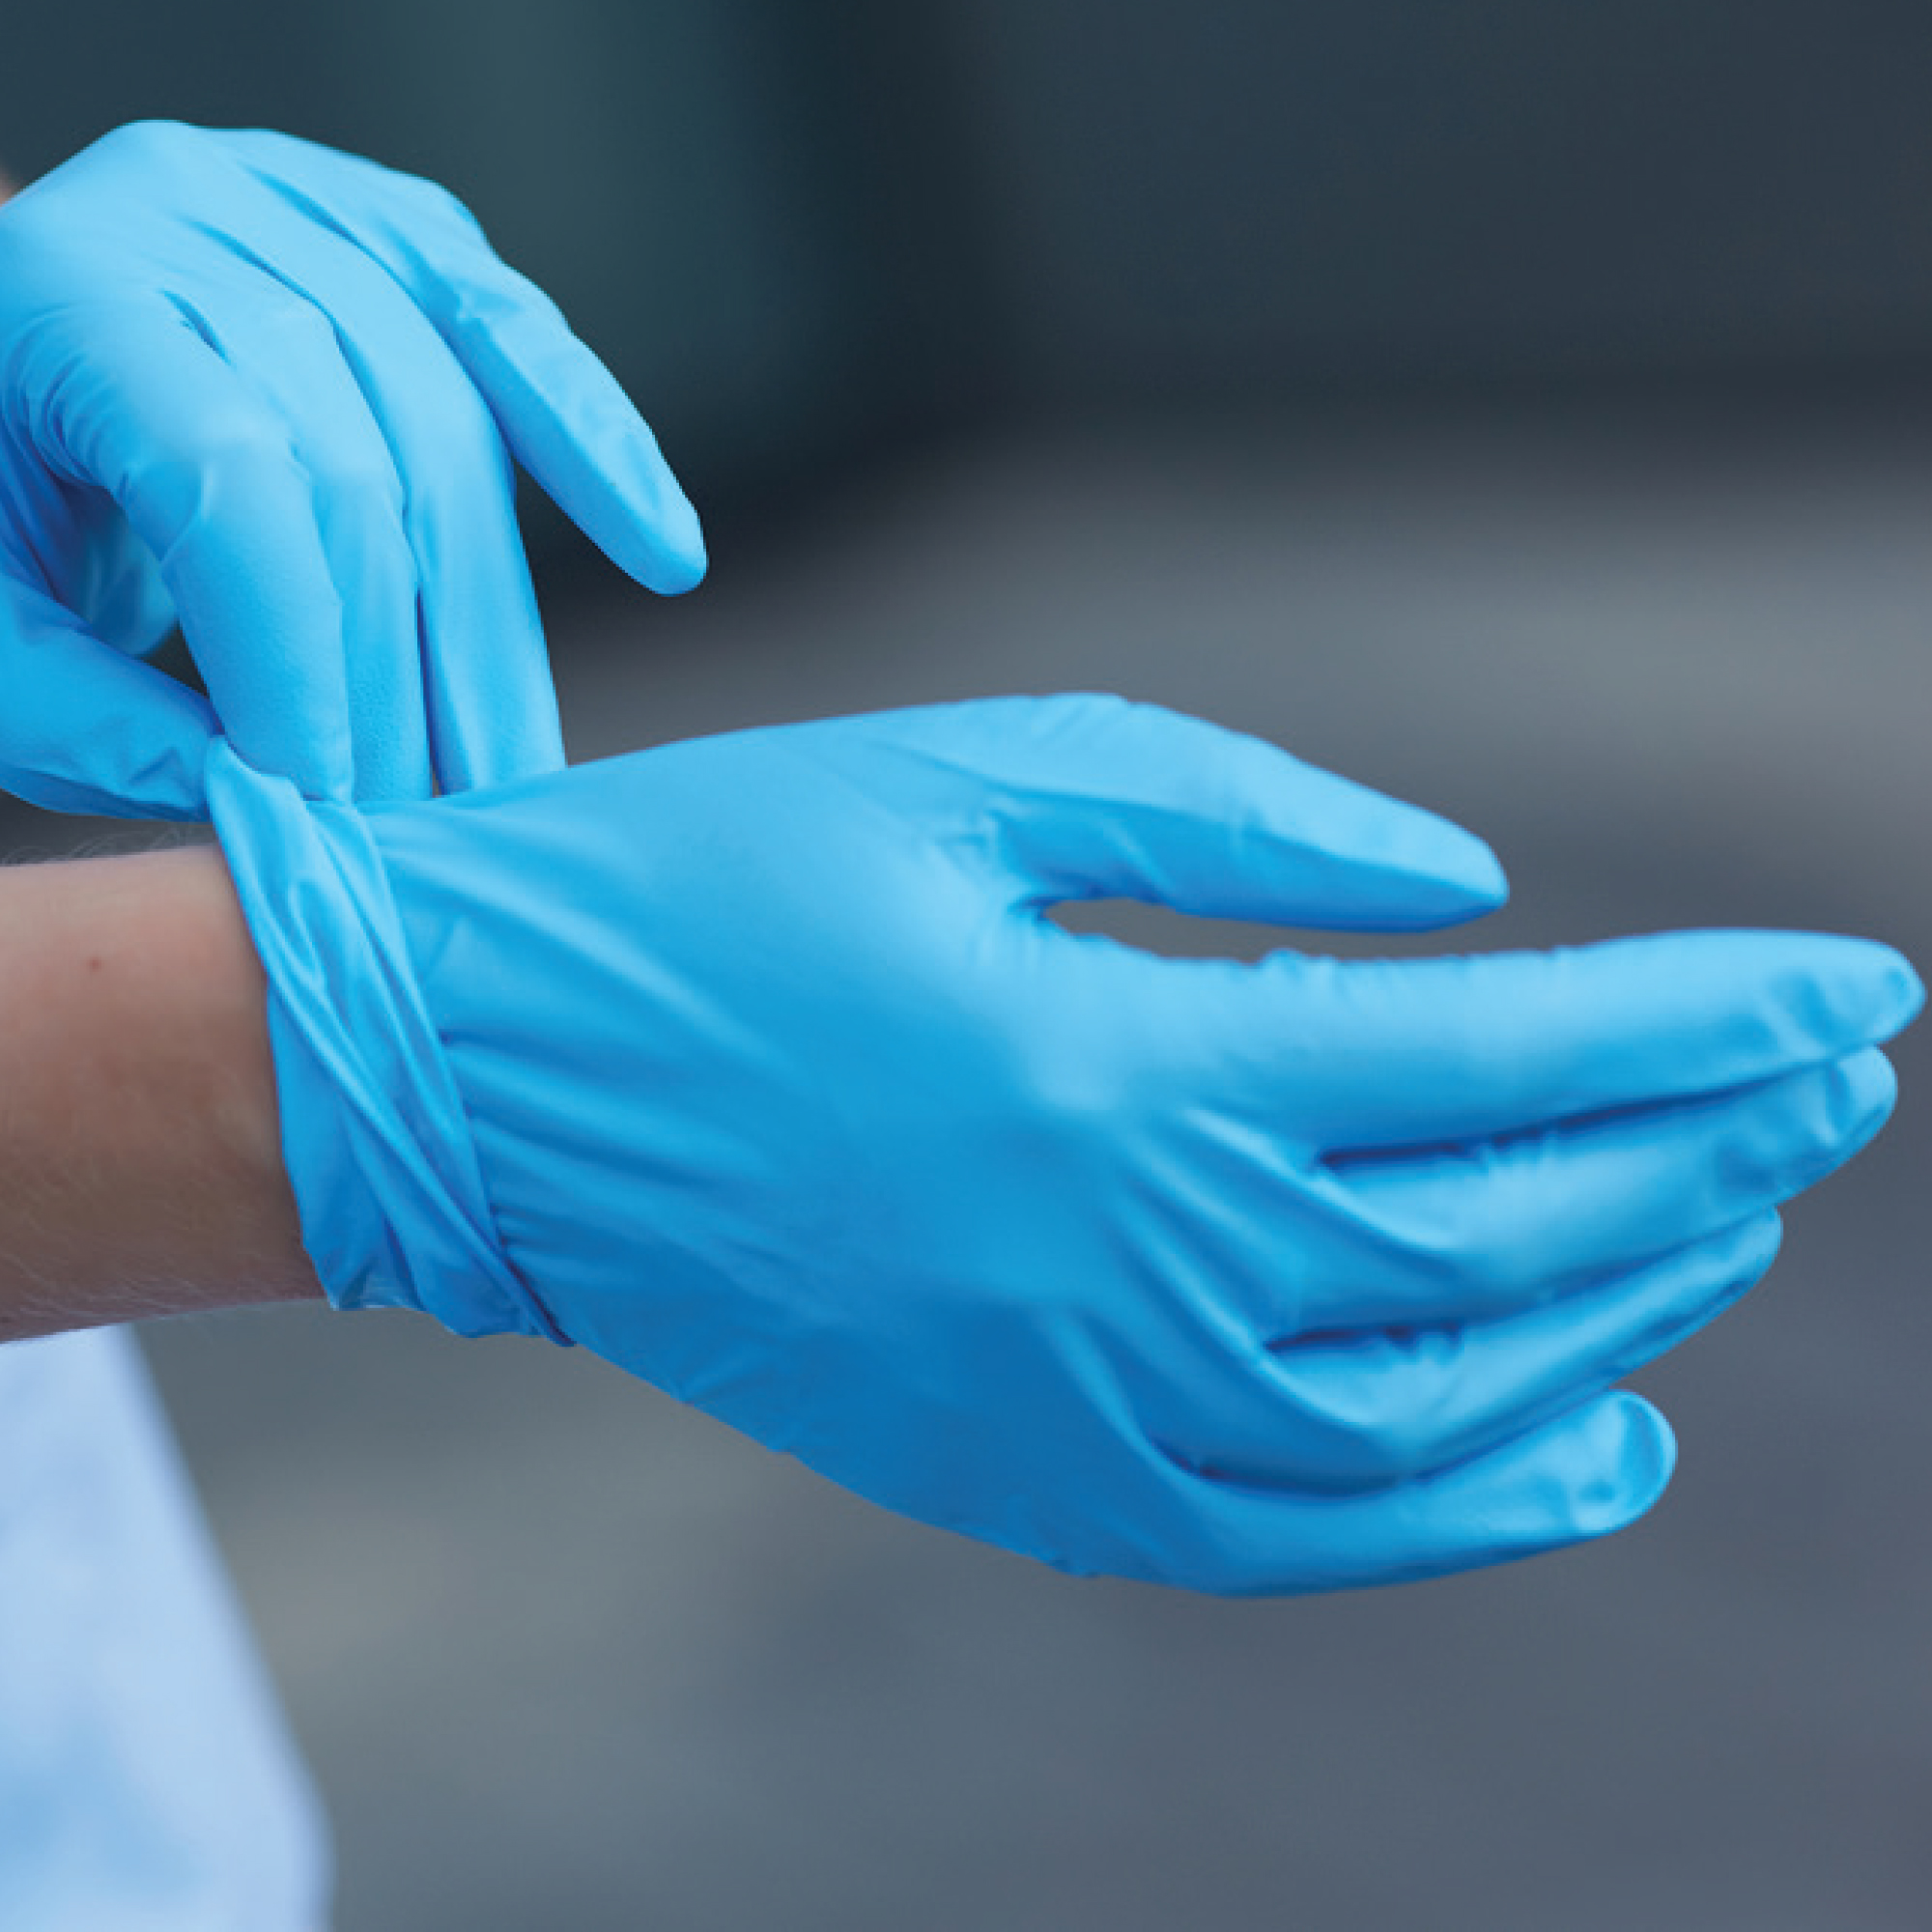 Default Category International/Medical practice/MEDICAL EXAMINATION AND SURGICAL GLOVES